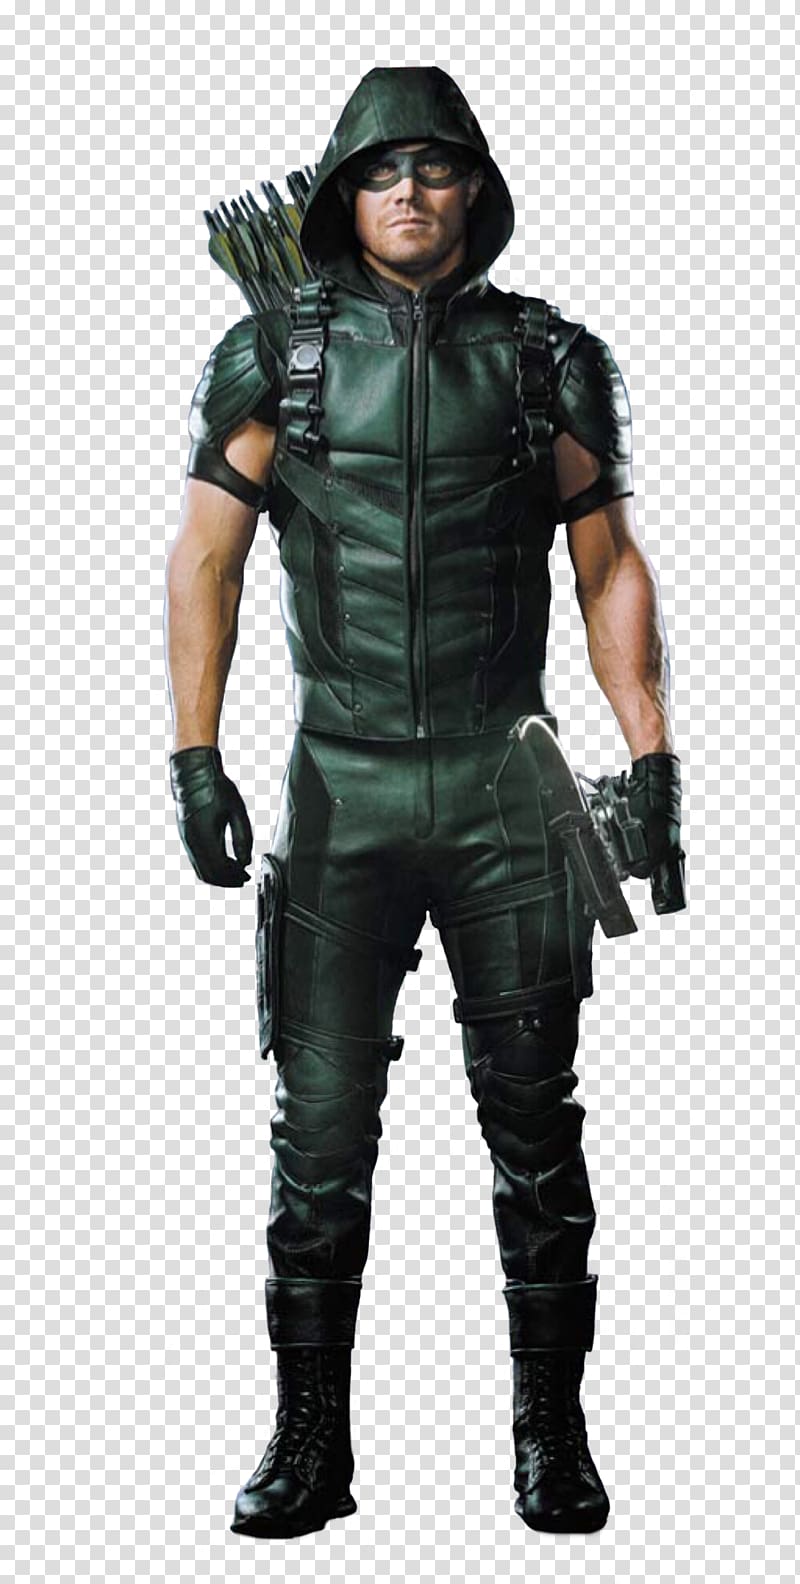 Green Arrow Oliver Queen Stephen Amell The CW, queen transparent background PNG clipart